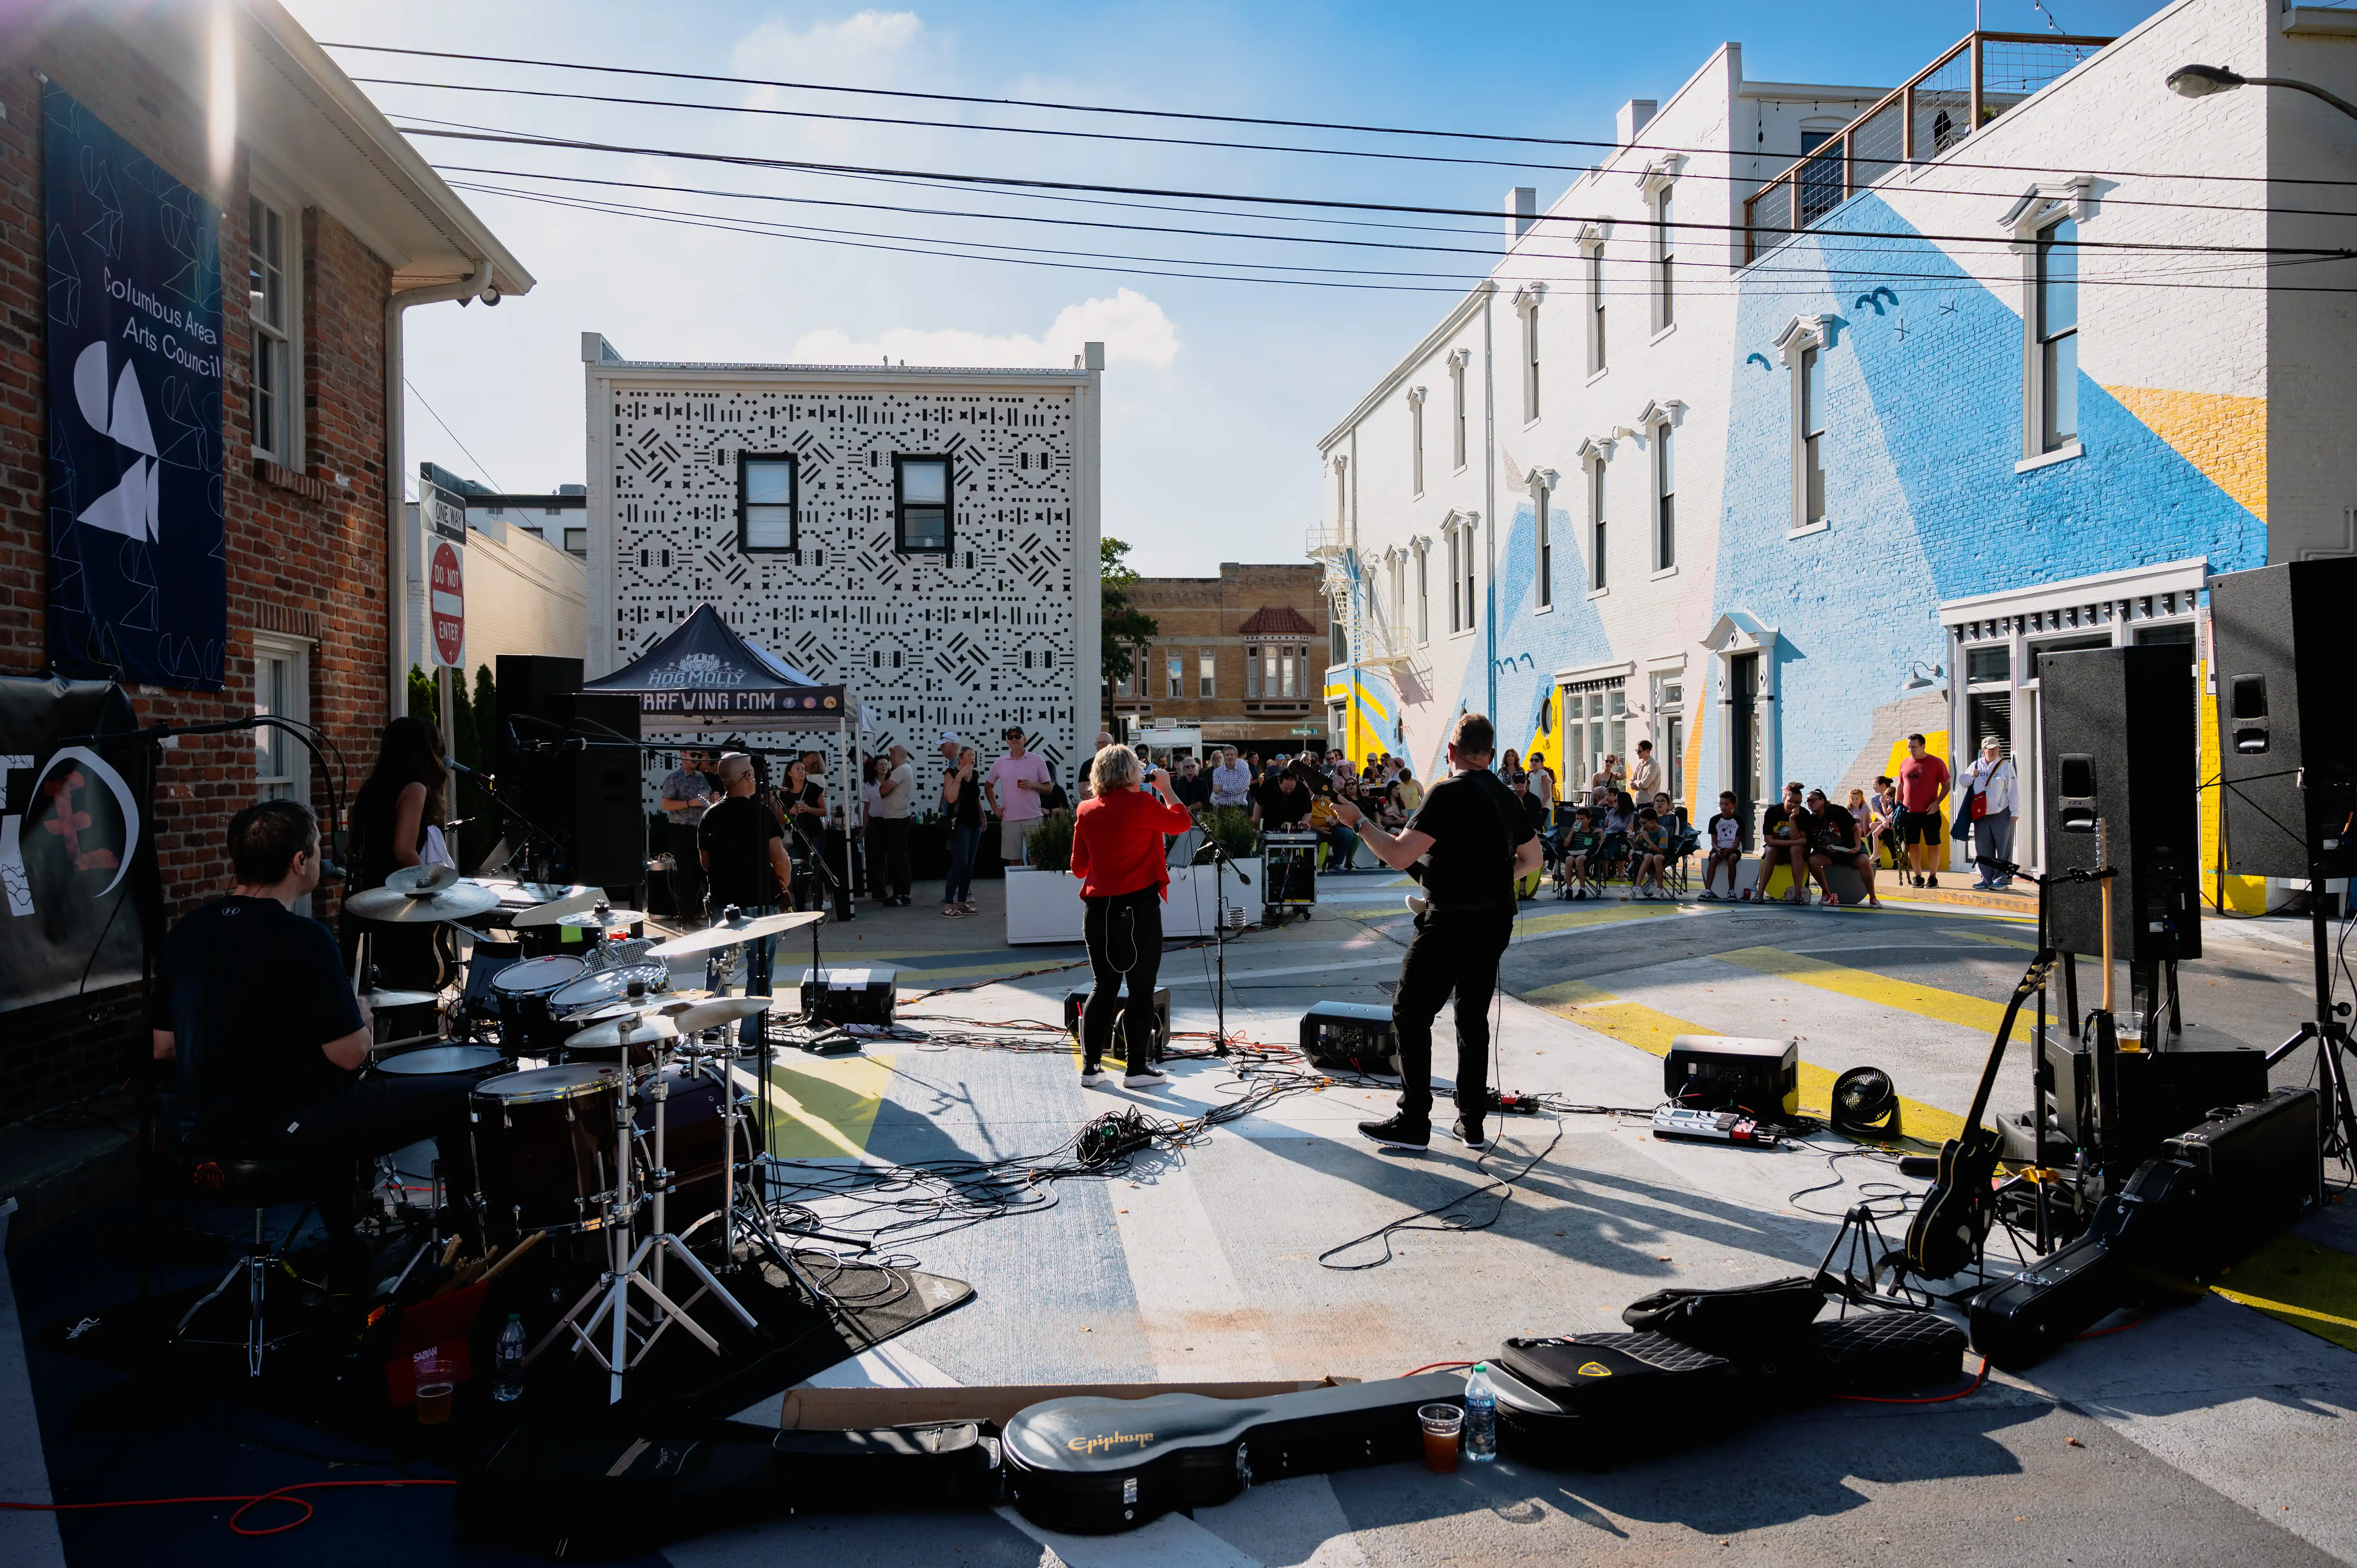 Outdoor live music event with audience watching a band perform on a small street stage, surrounded by buildings with mural art.